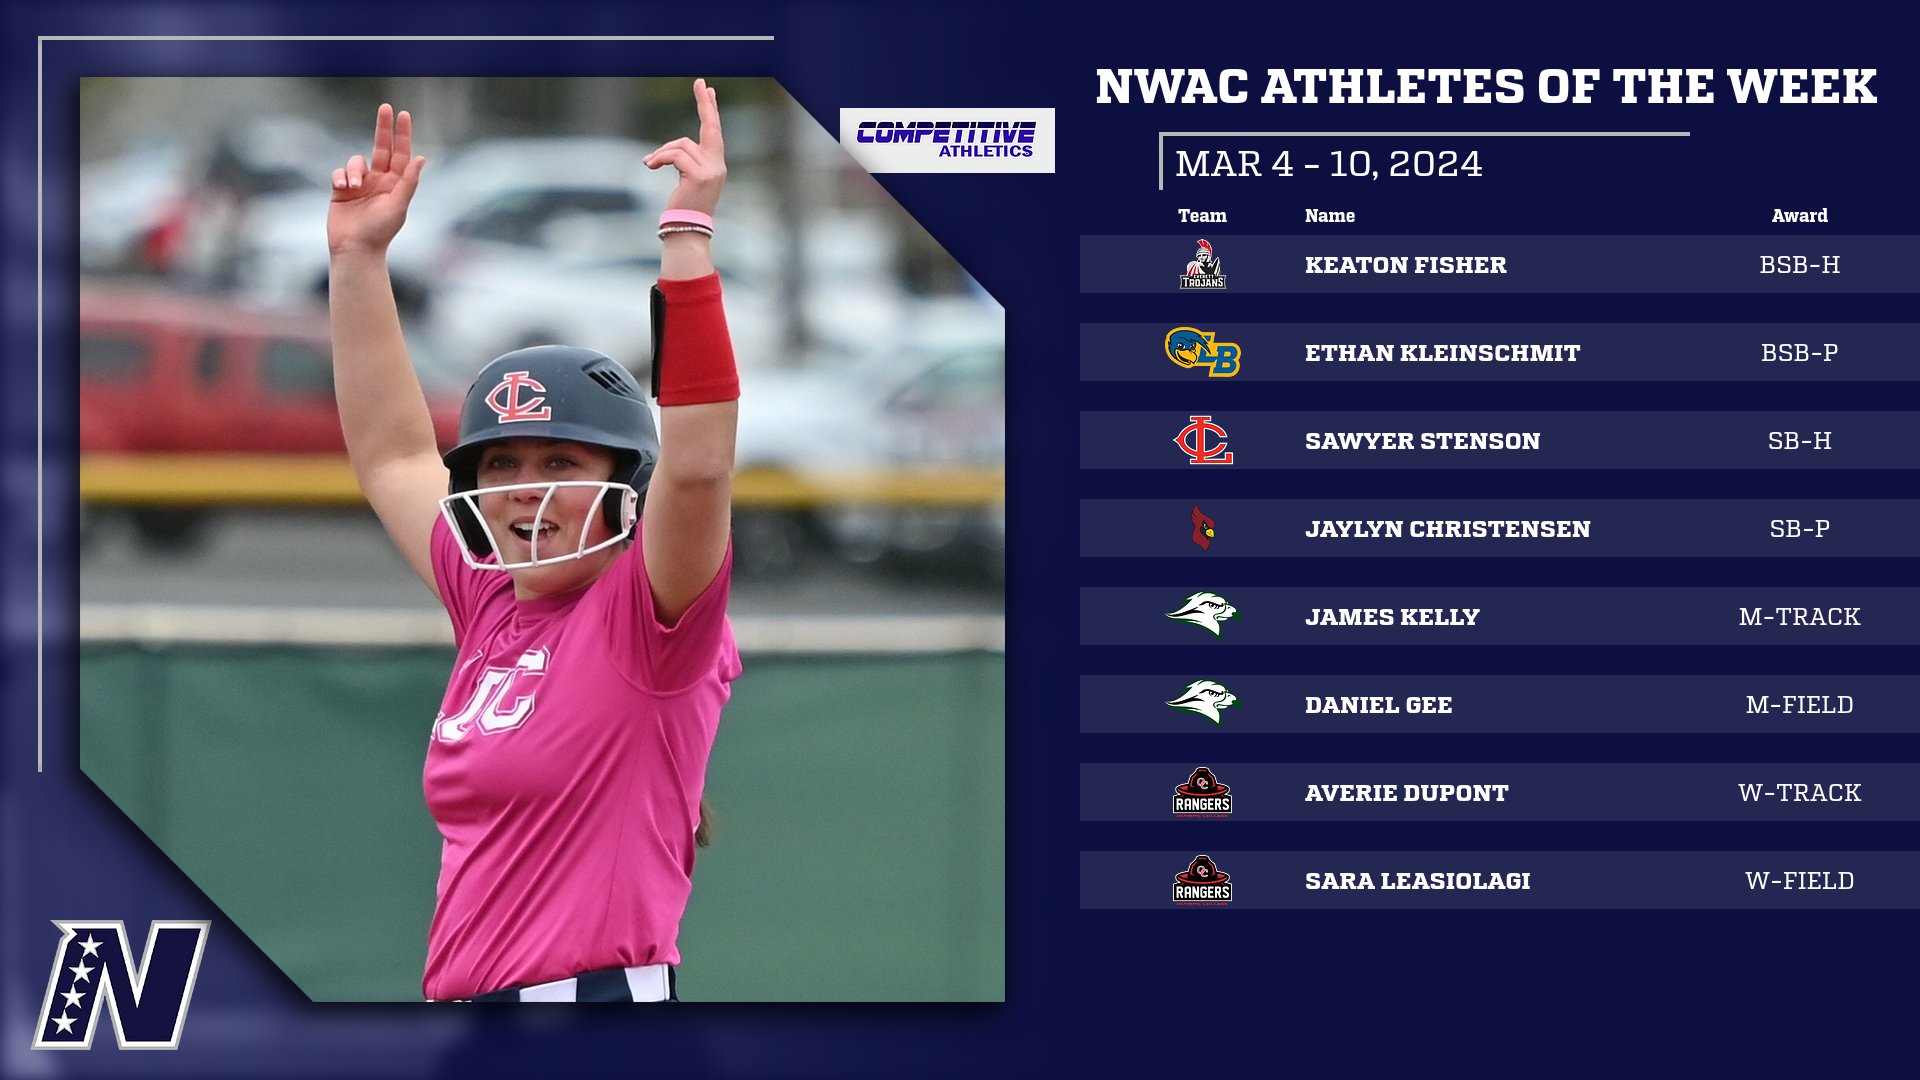 Competitive Athletics NWAC Athletes of the Week: March 4 - 10